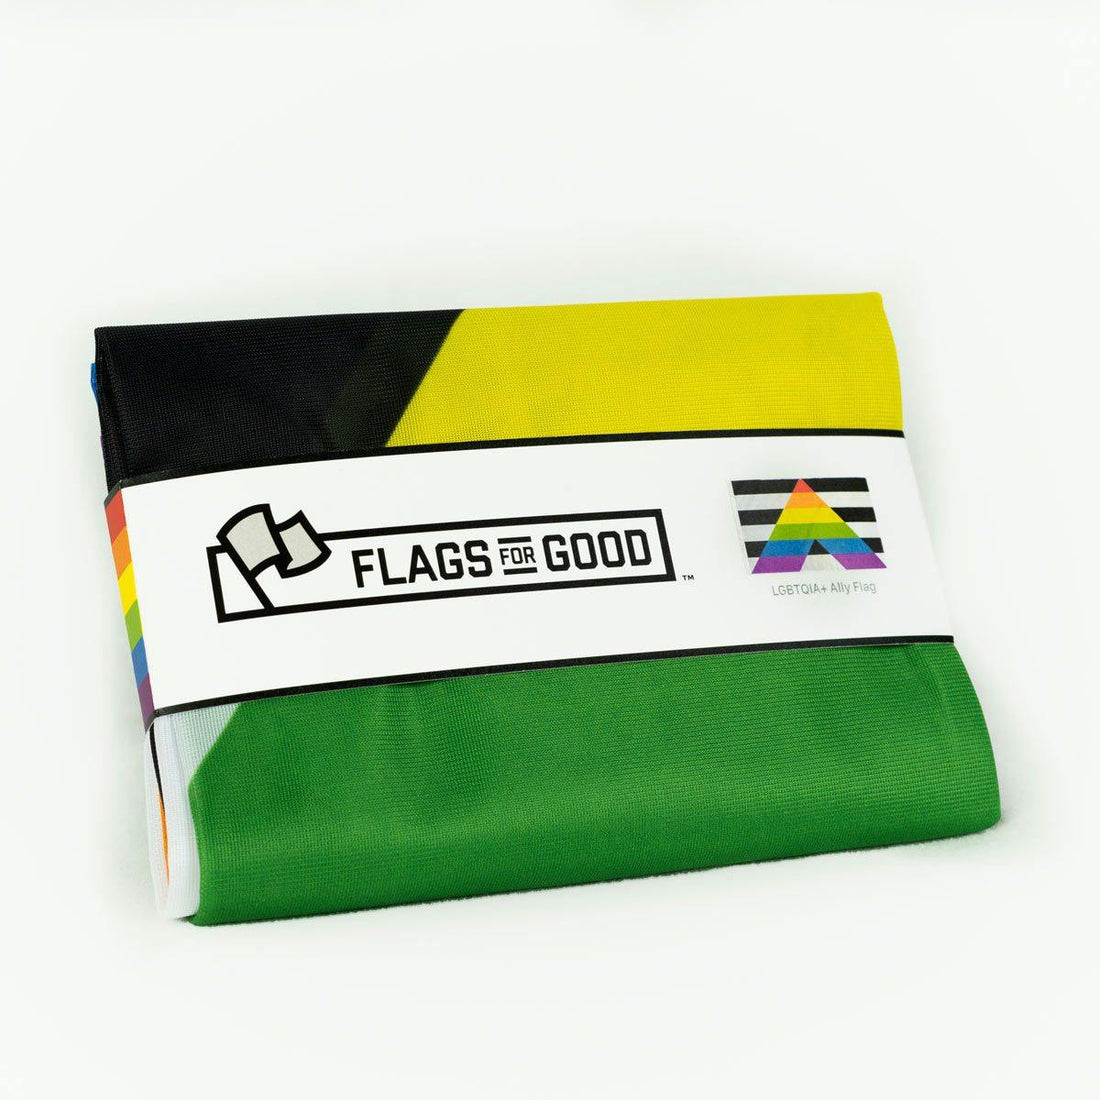 LGBTQ Ally Flag | $1 Donated | Flags For Good